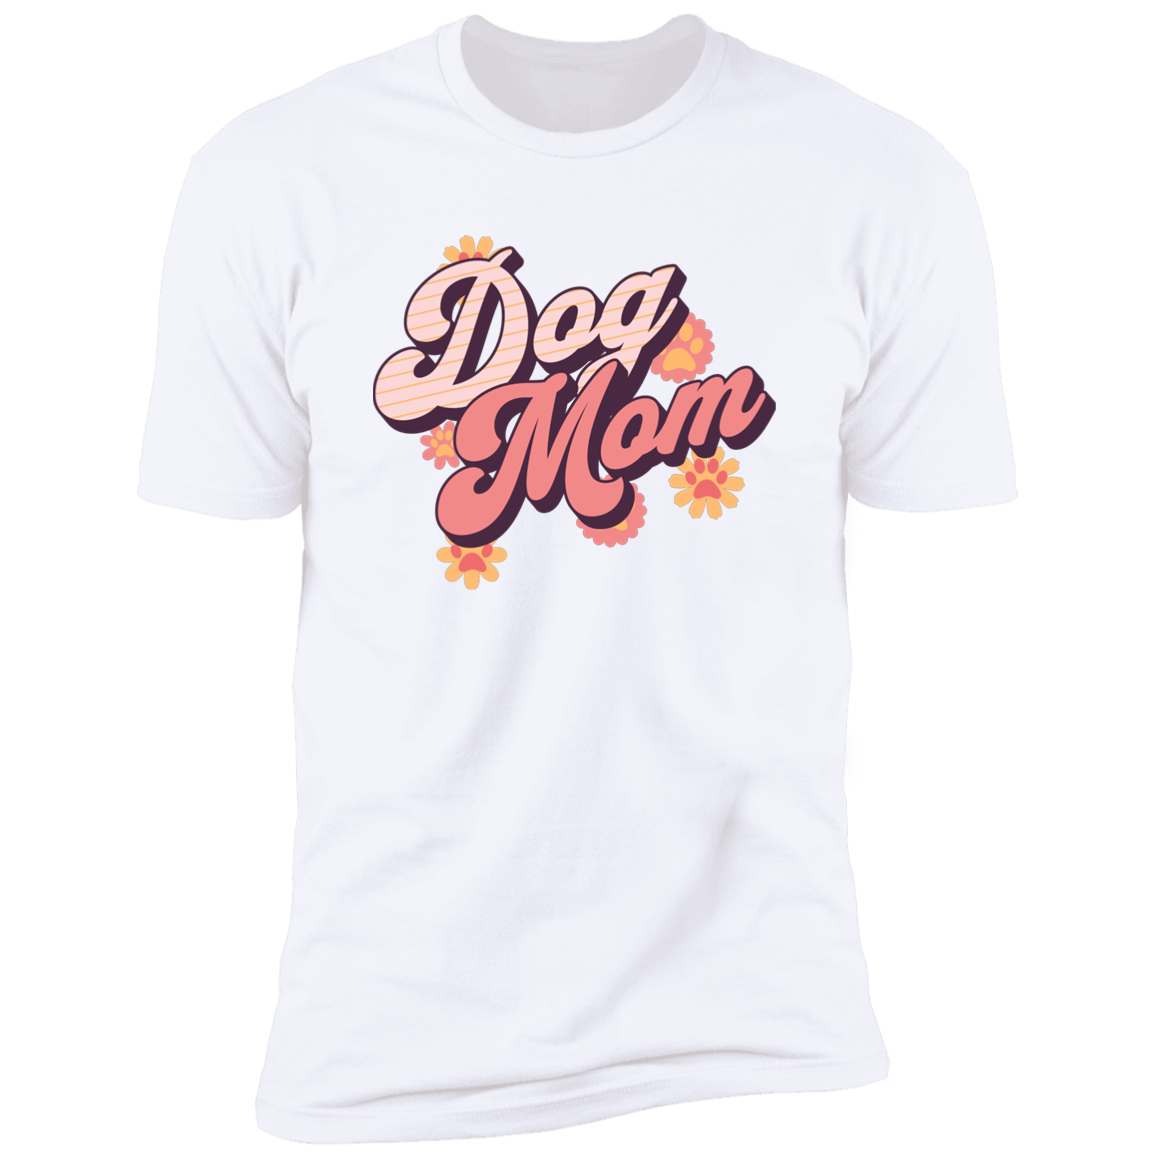 Retro Dog Mom t-shirt, Dog Mom shirt, Dog T-shirt for humans, in white